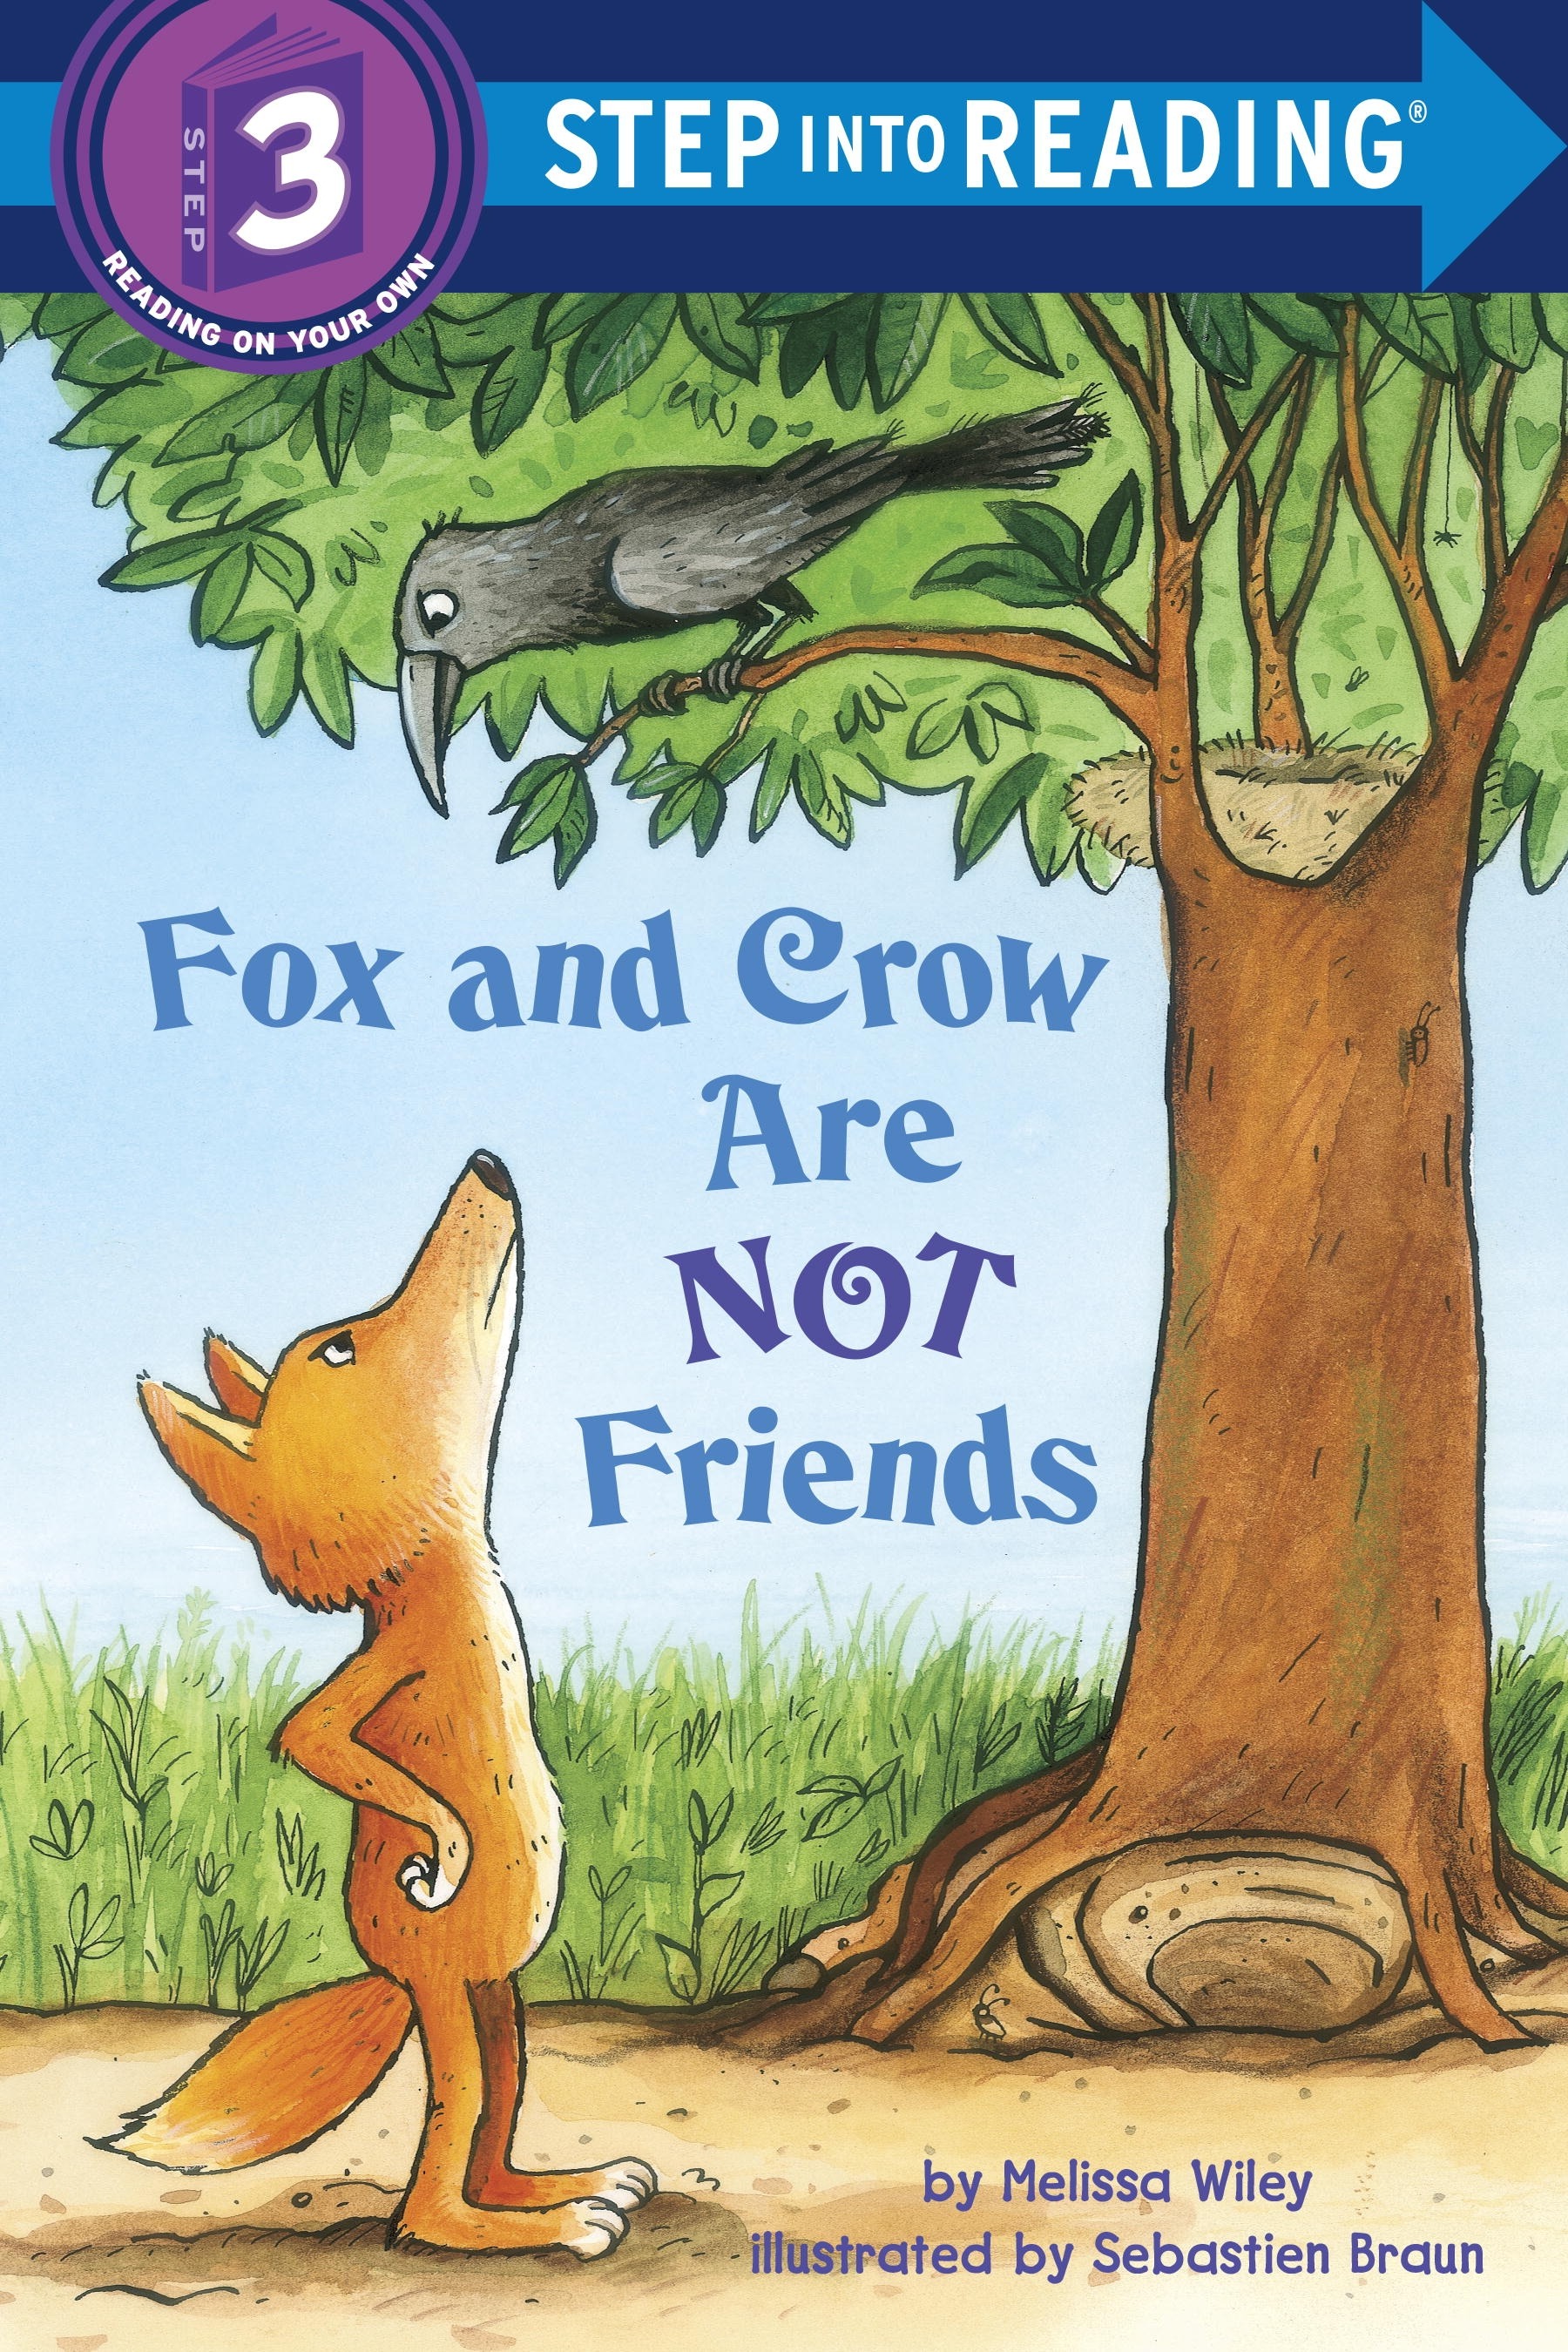 Fox and Crow are not friends